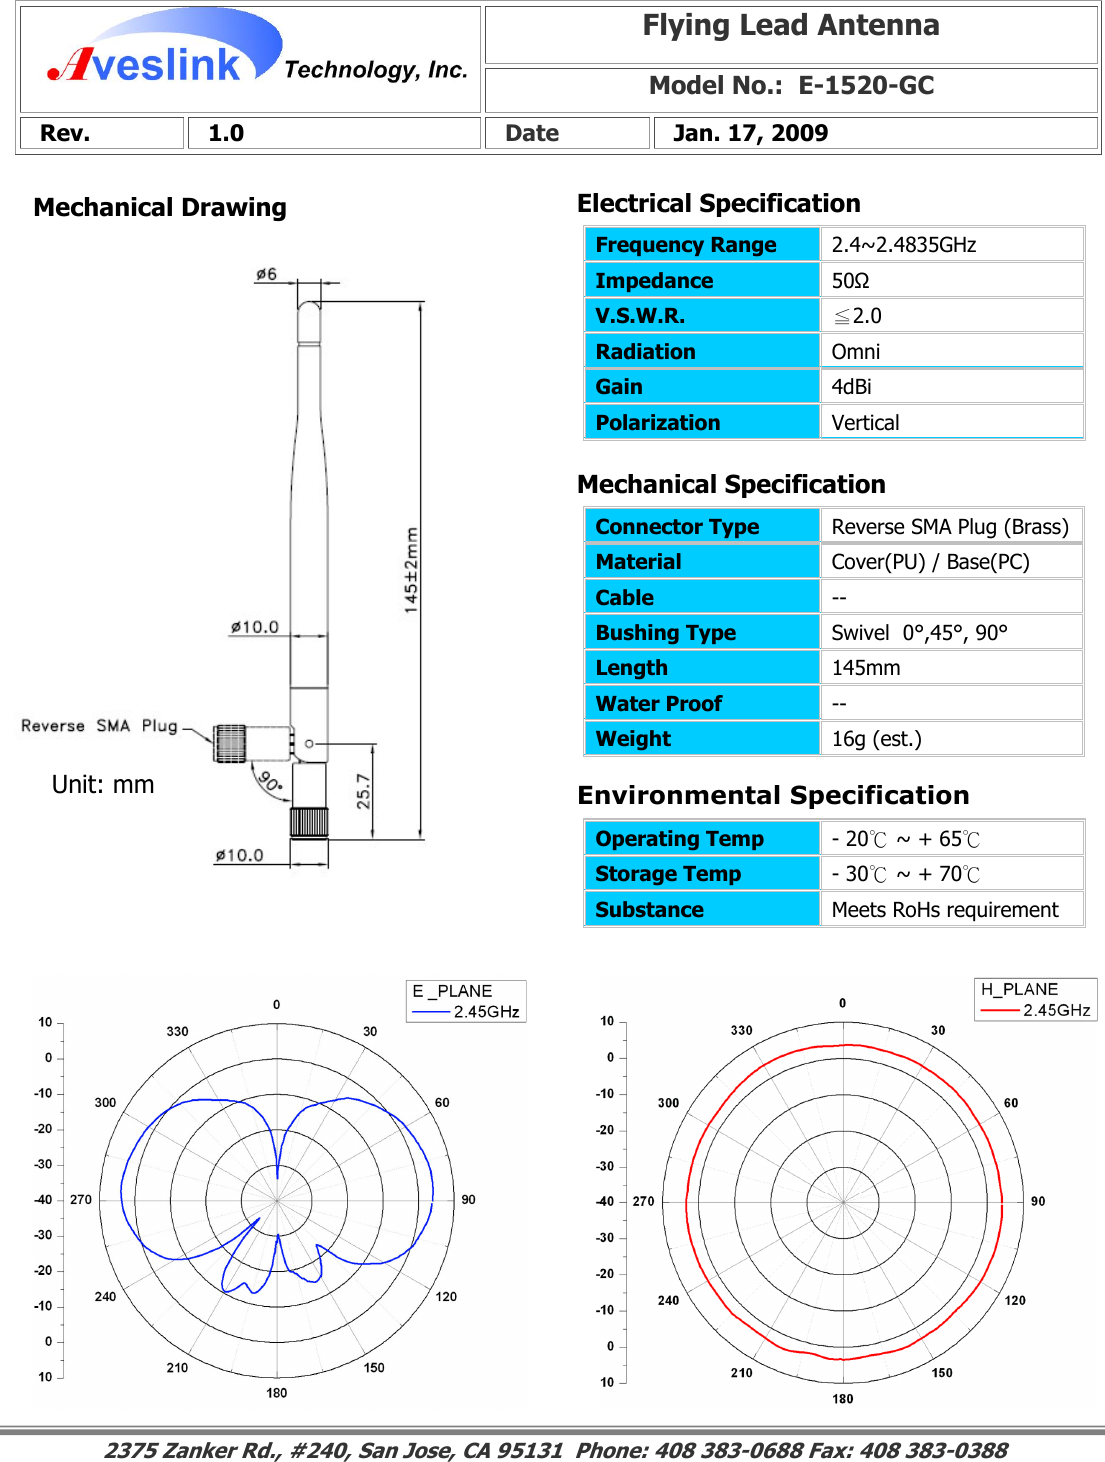 Mechanical DrawingMechanical Specification Environmental SpecificationFlying Lead Antenna Model No.:  E-1520-GC  Rev.   1.0   Date   Jan. 17, 2009 Connector Type   Reverse SMA Plug (Brass)Material  Cover(PU) / Base(PC) Cable  -- Bushing Type  Swivel  0°,45°, 90° Length  145mm Water Proof  -- Weight  16g (est.)                                                                                                                                                                                                                        2375 Zanker Rd., #240, San Jose, CA 95131  Phone: 408 383-0688 Fax: 408 383-0388 Operating Temp  - 20℃ ~ + 65℃ Storage Temp  - 30℃ ~ + 70℃ Substance  Meets RoHs requirement Electrical SpecificationFrequency Range   2.4~2.4835GHz Impedance  50Ω V.S.W.R.  ≦2.0 Radiation  Omni Gain  4dBi Polarization  Vertical Unit: mm 